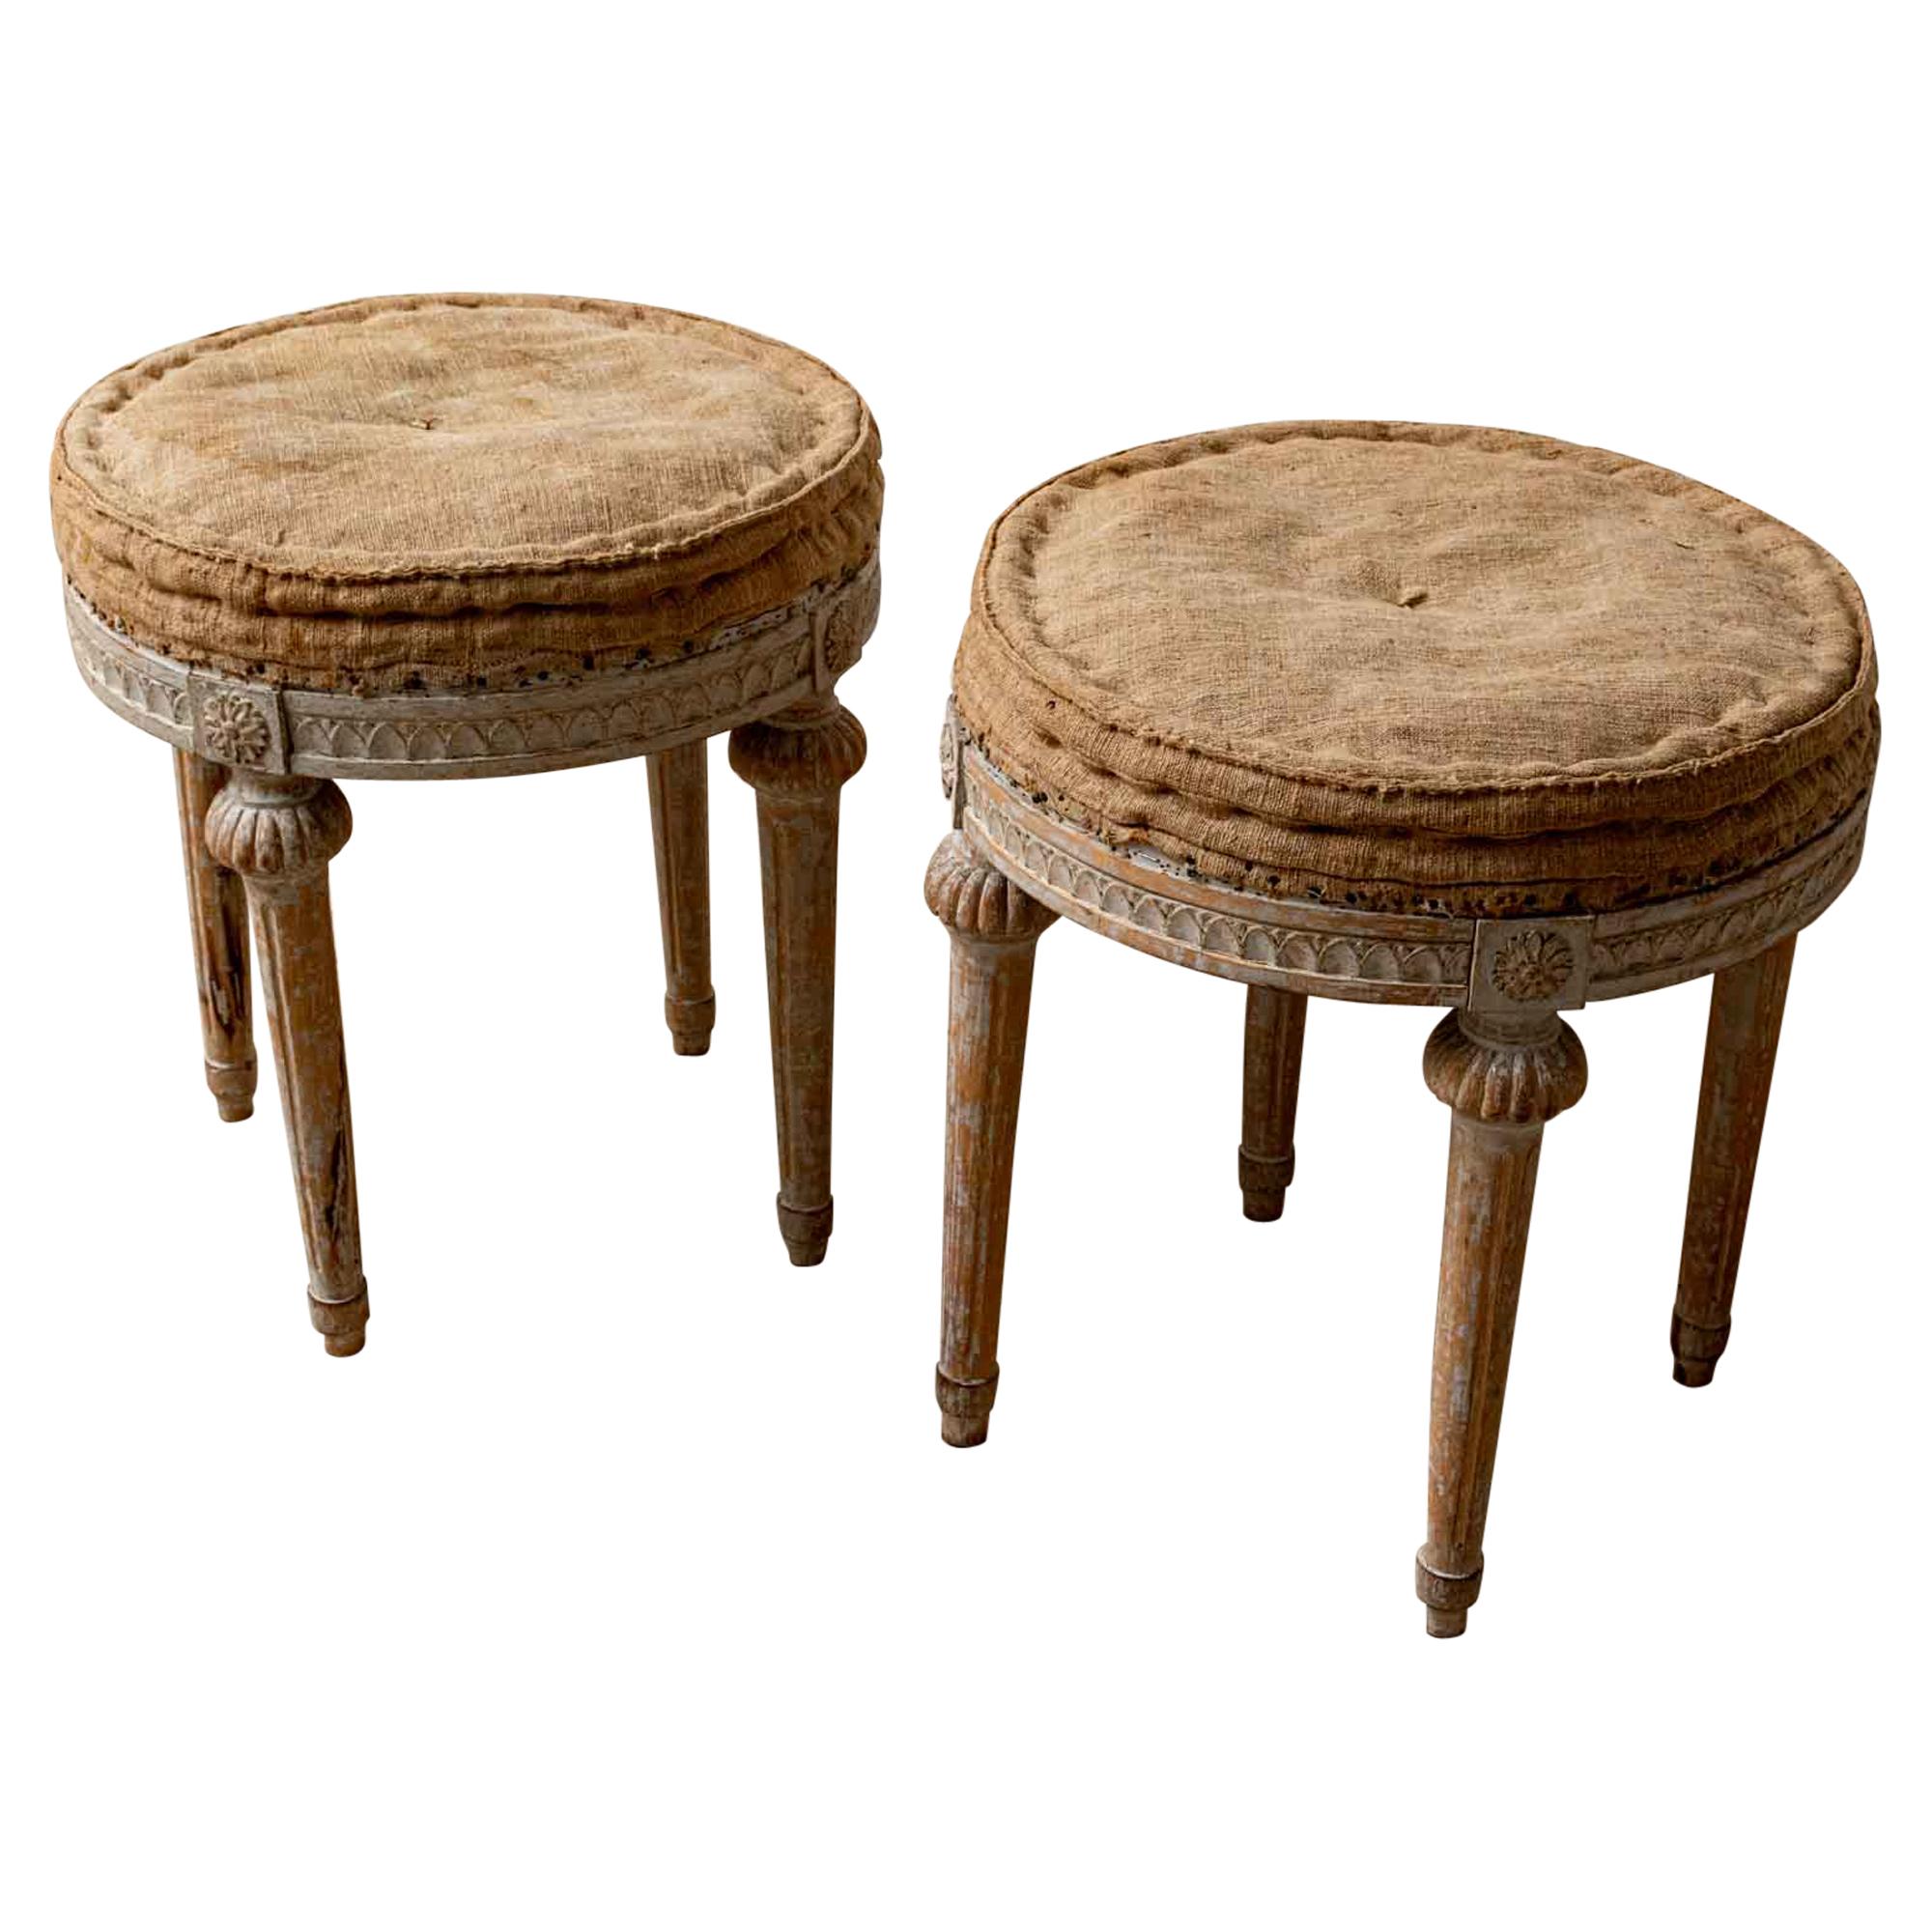 Early 19th Century Pair of Round Swedish Gustavian Period Four Legged Stools